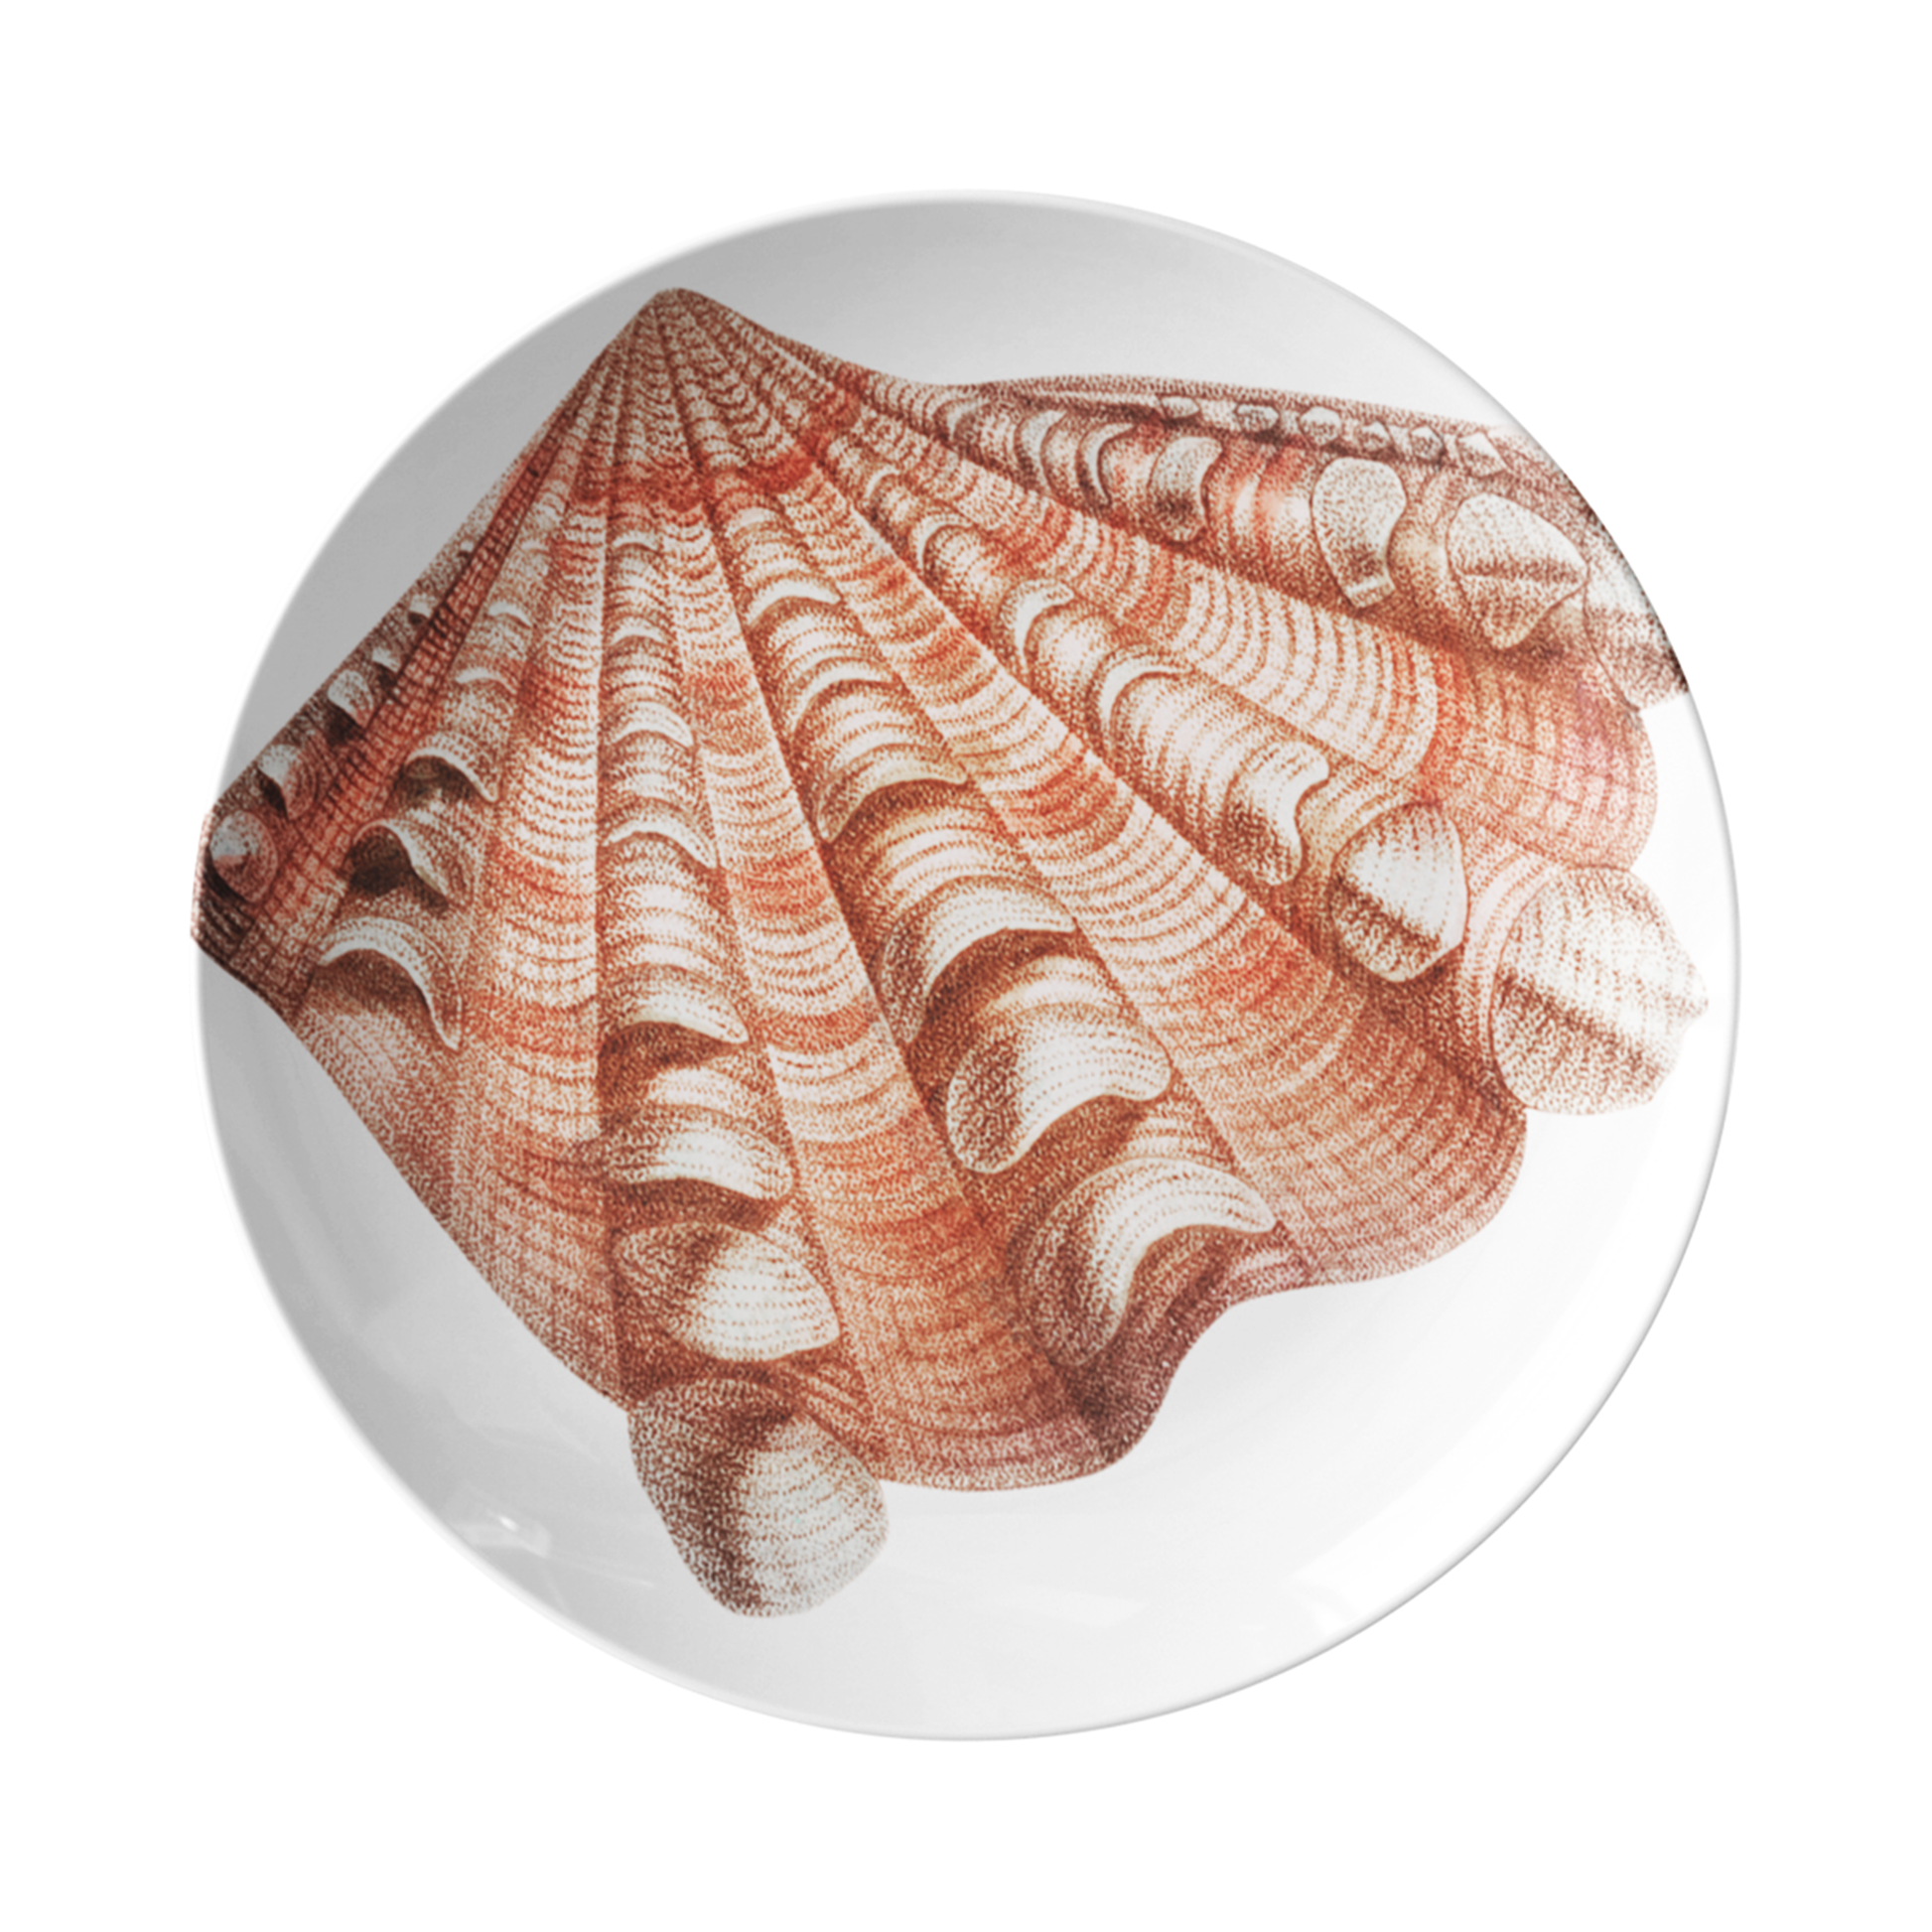 Seashell Print Plastic Plate Features a Fluted Clam Shell in coral and white stripes.